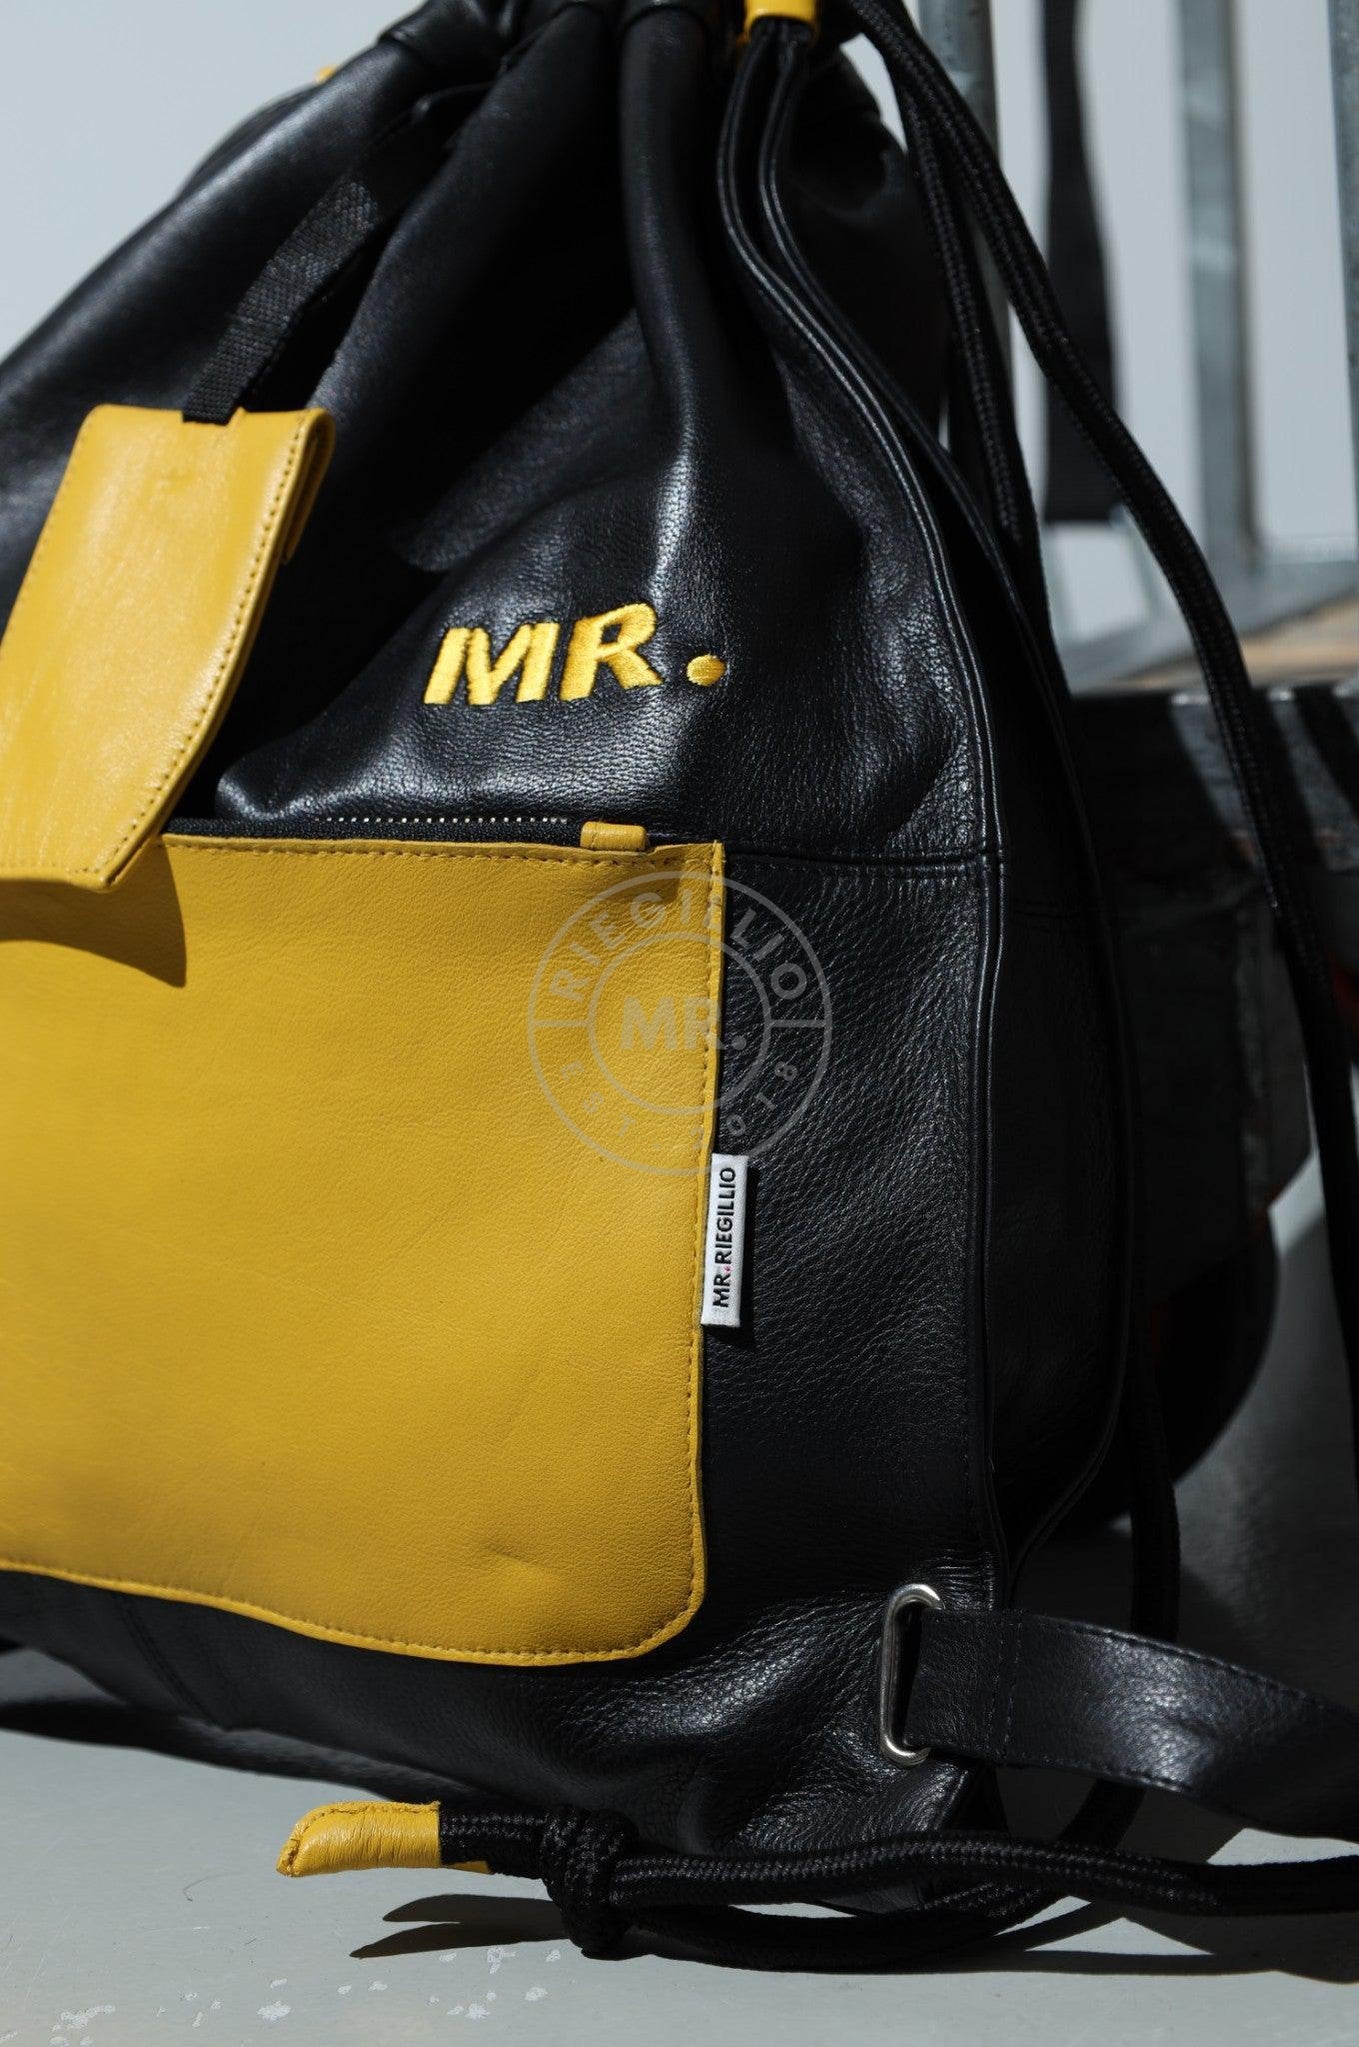 Leather Backpack Black - Yellow Touch-at MR. Riegillio